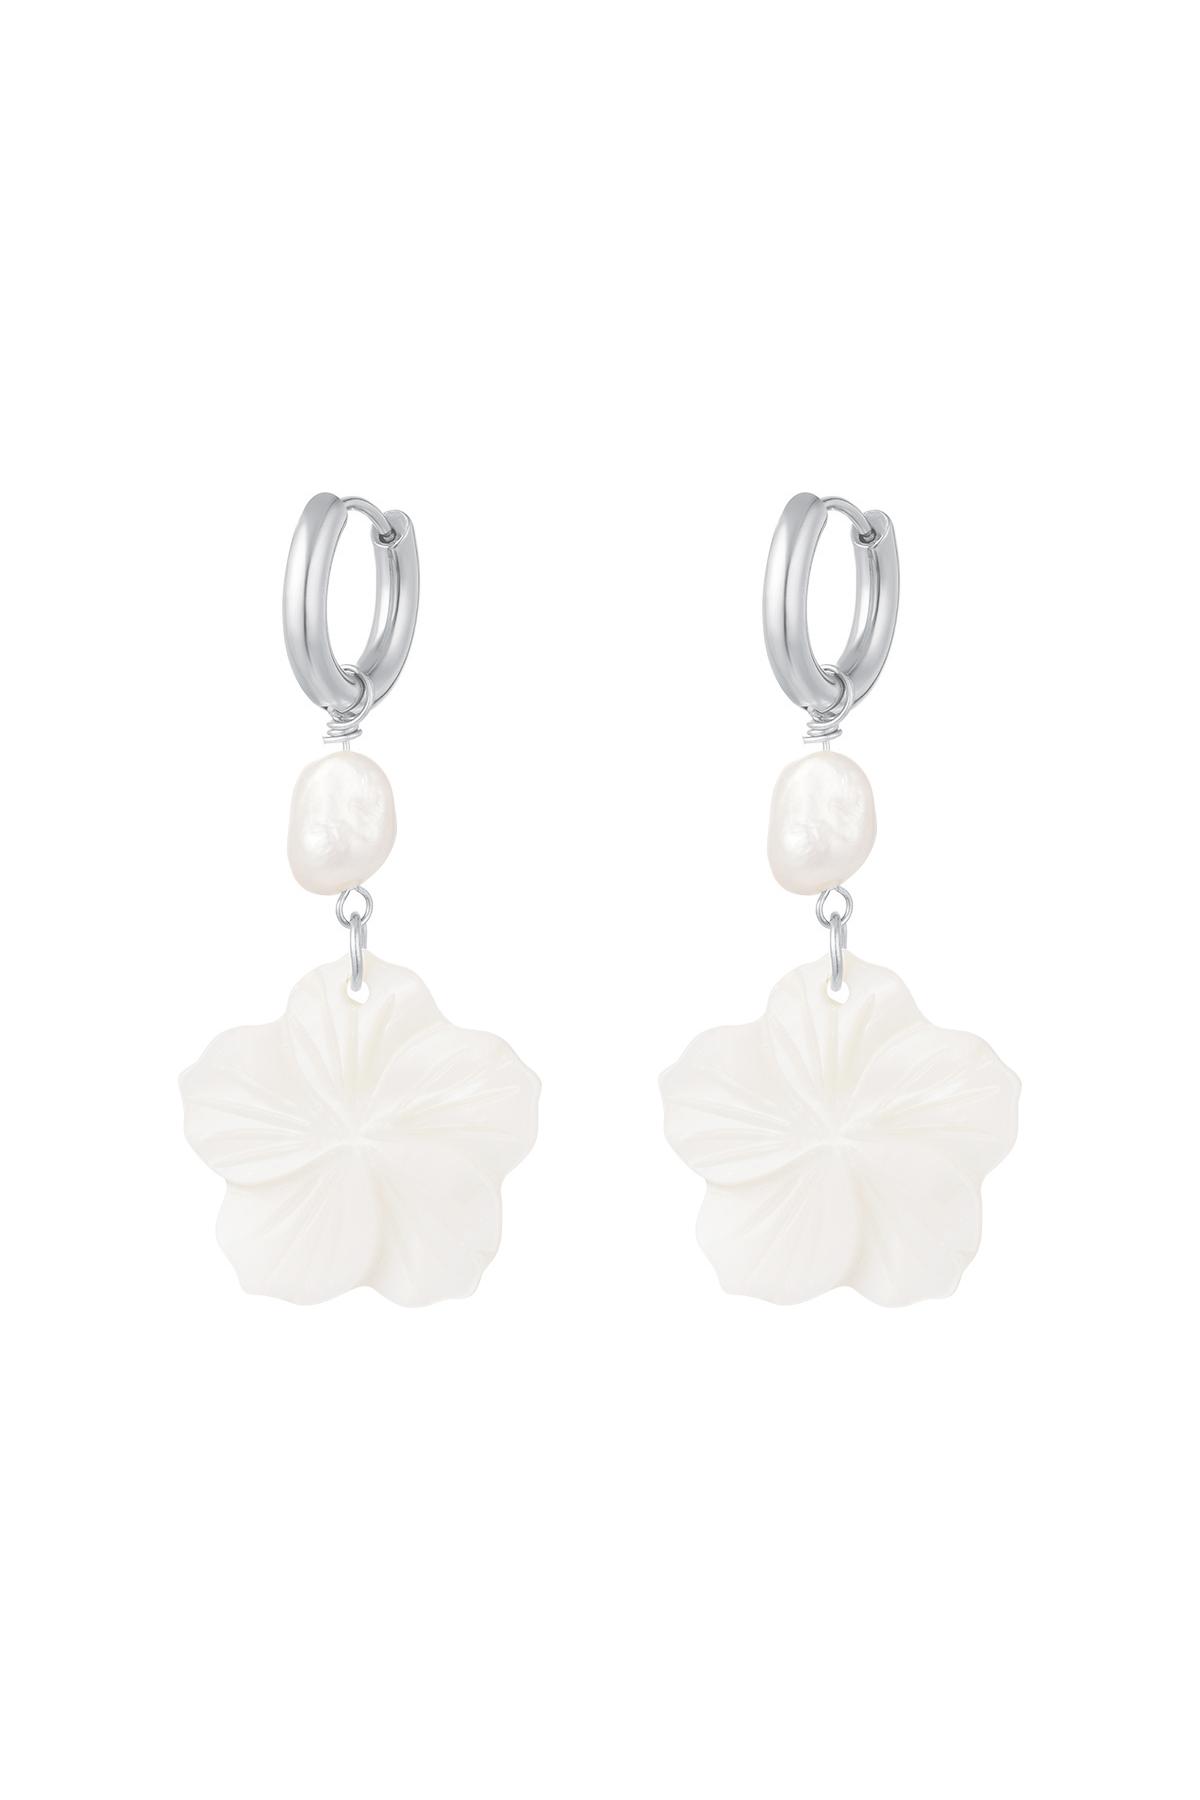 Flower earrings - Beach collection Silver Stainless Steel h5 